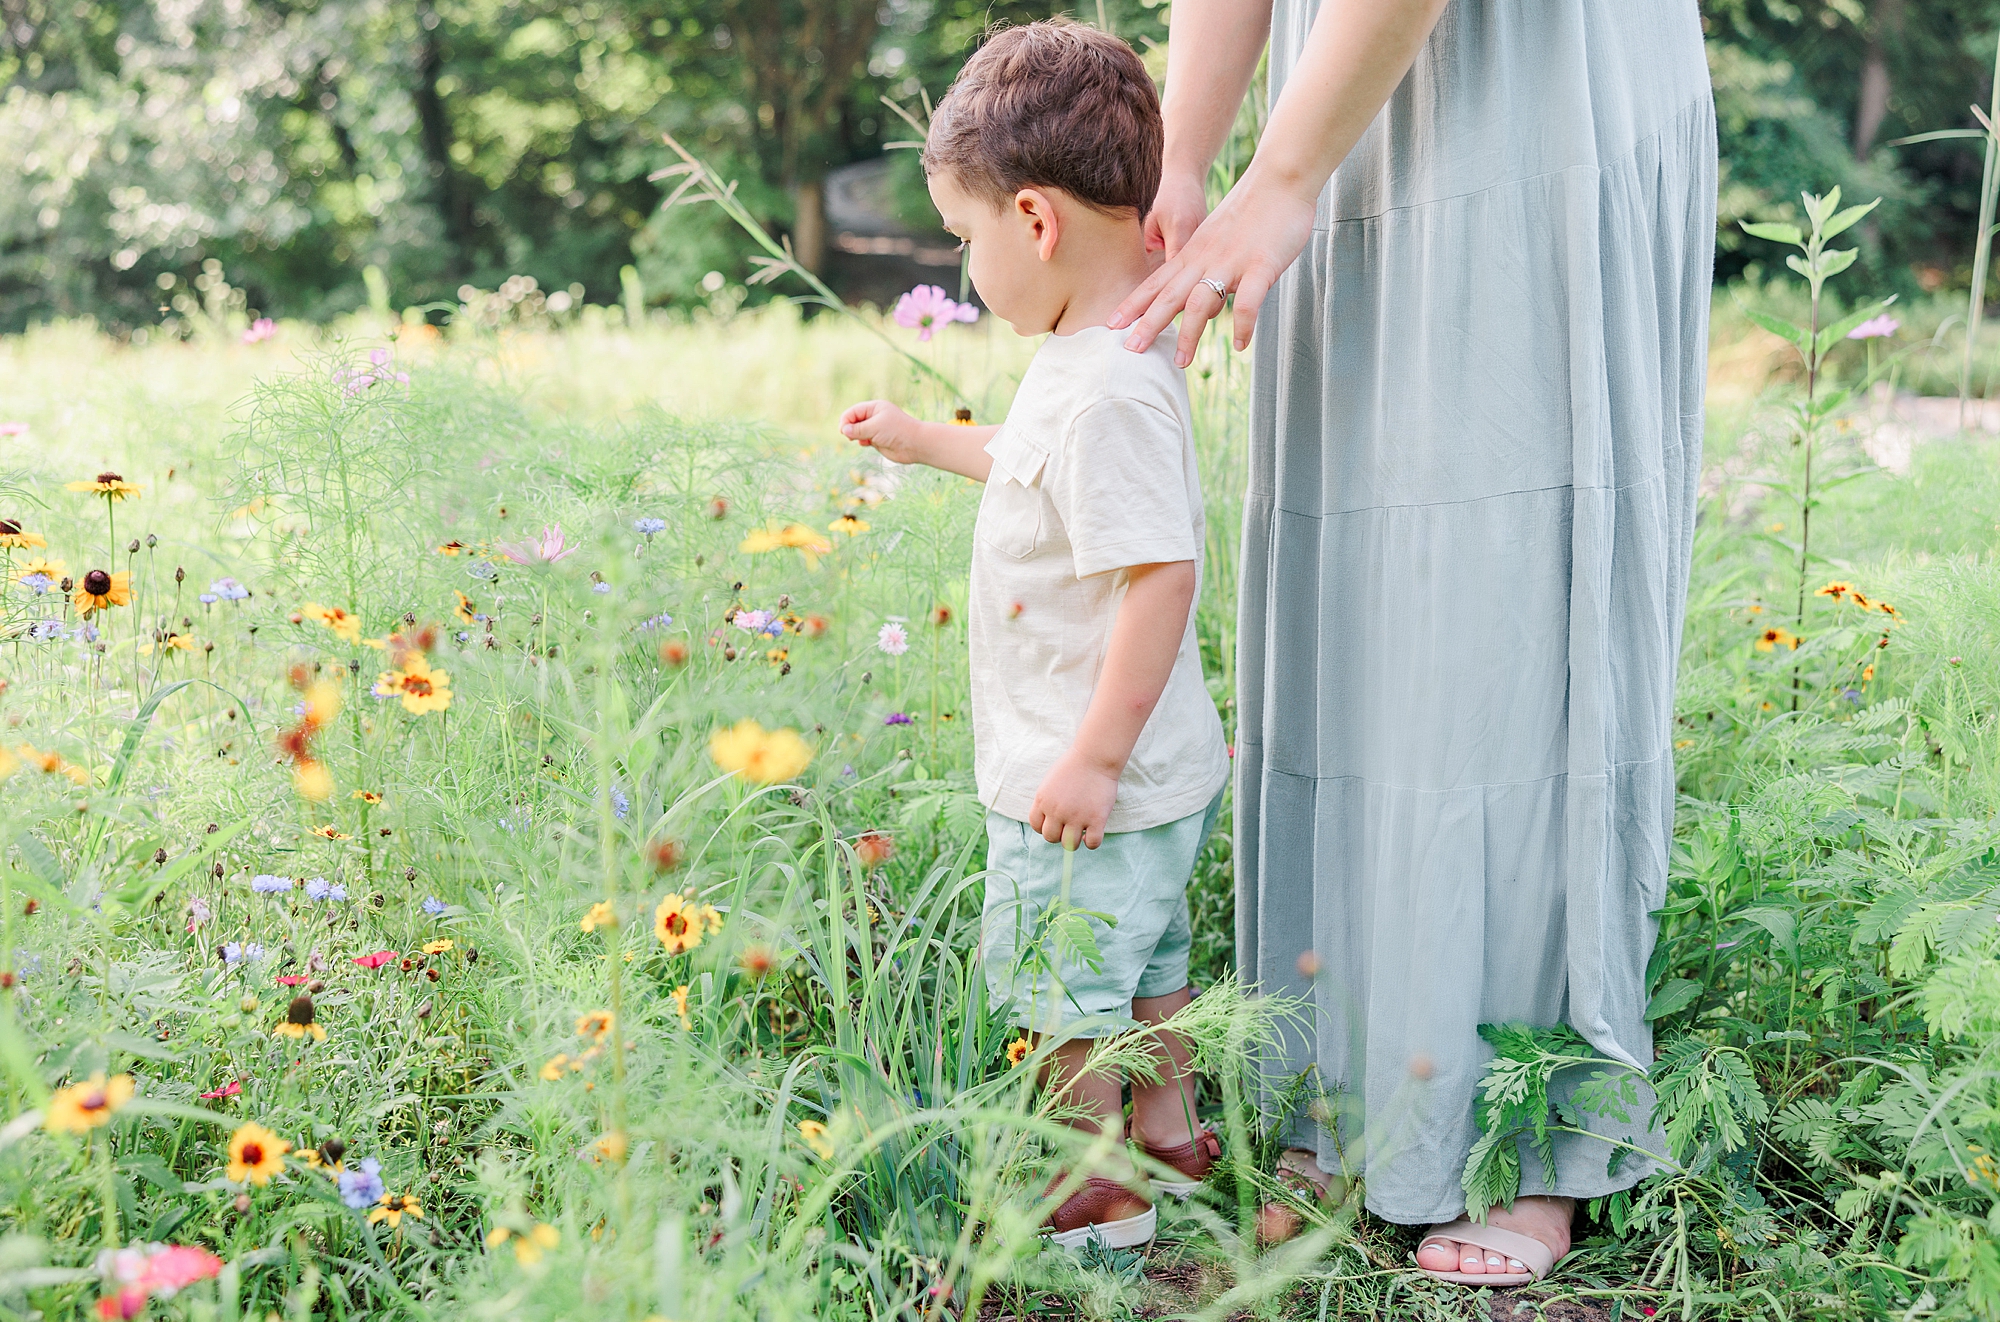 mom stands behind son while he looks at yellow wildflowers